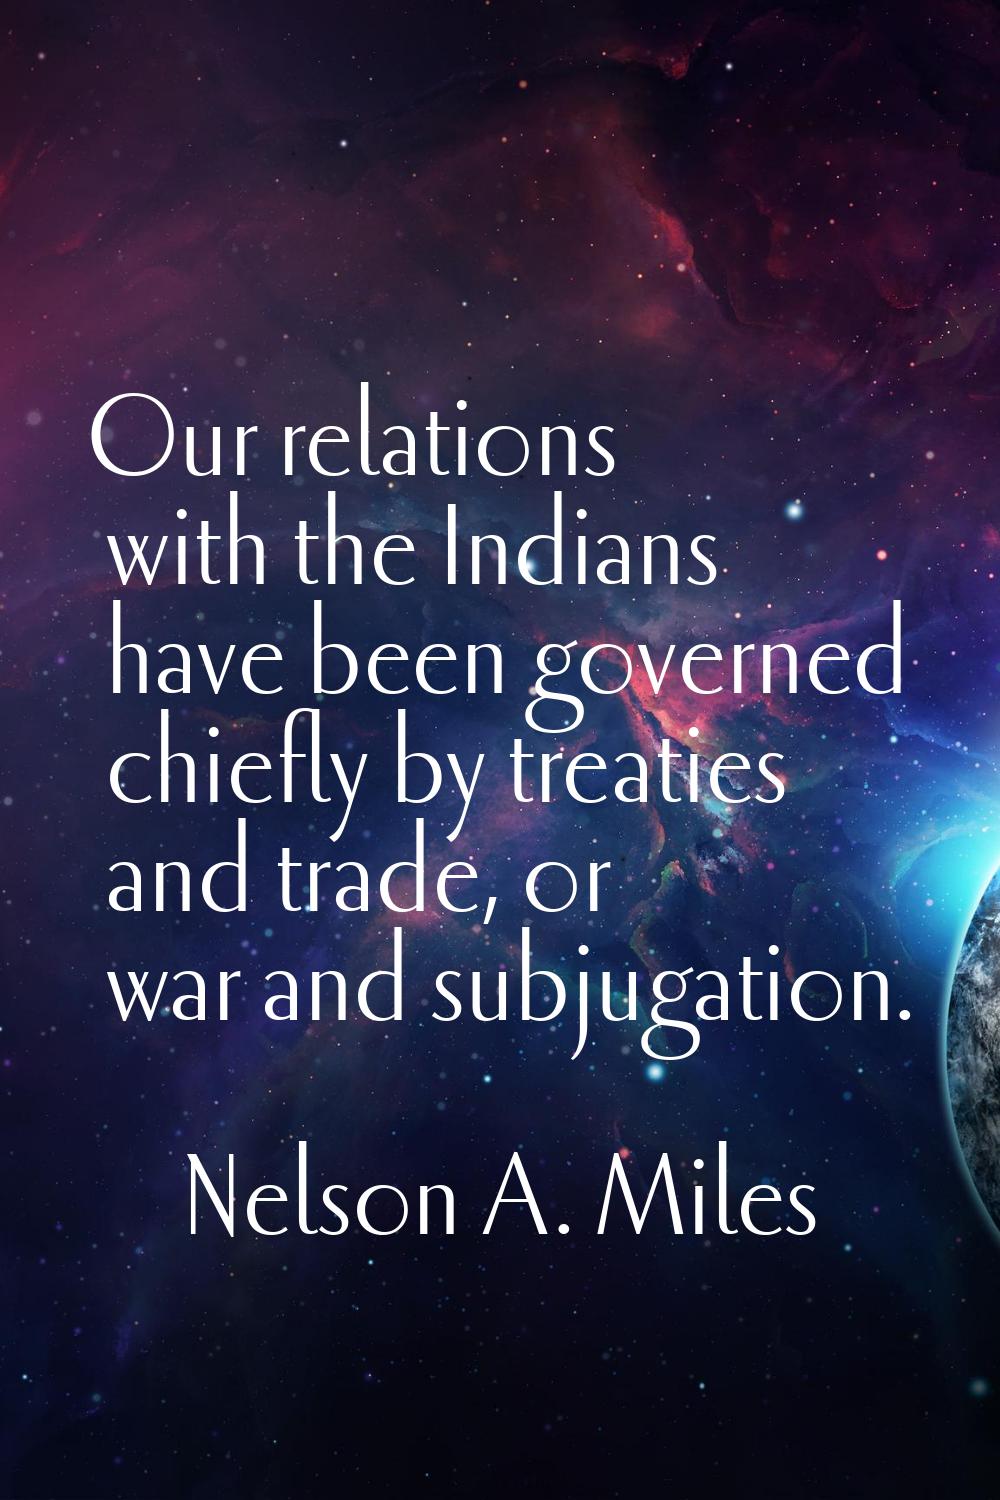 Our relations with the Indians have been governed chiefly by treaties and trade, or war and subjuga